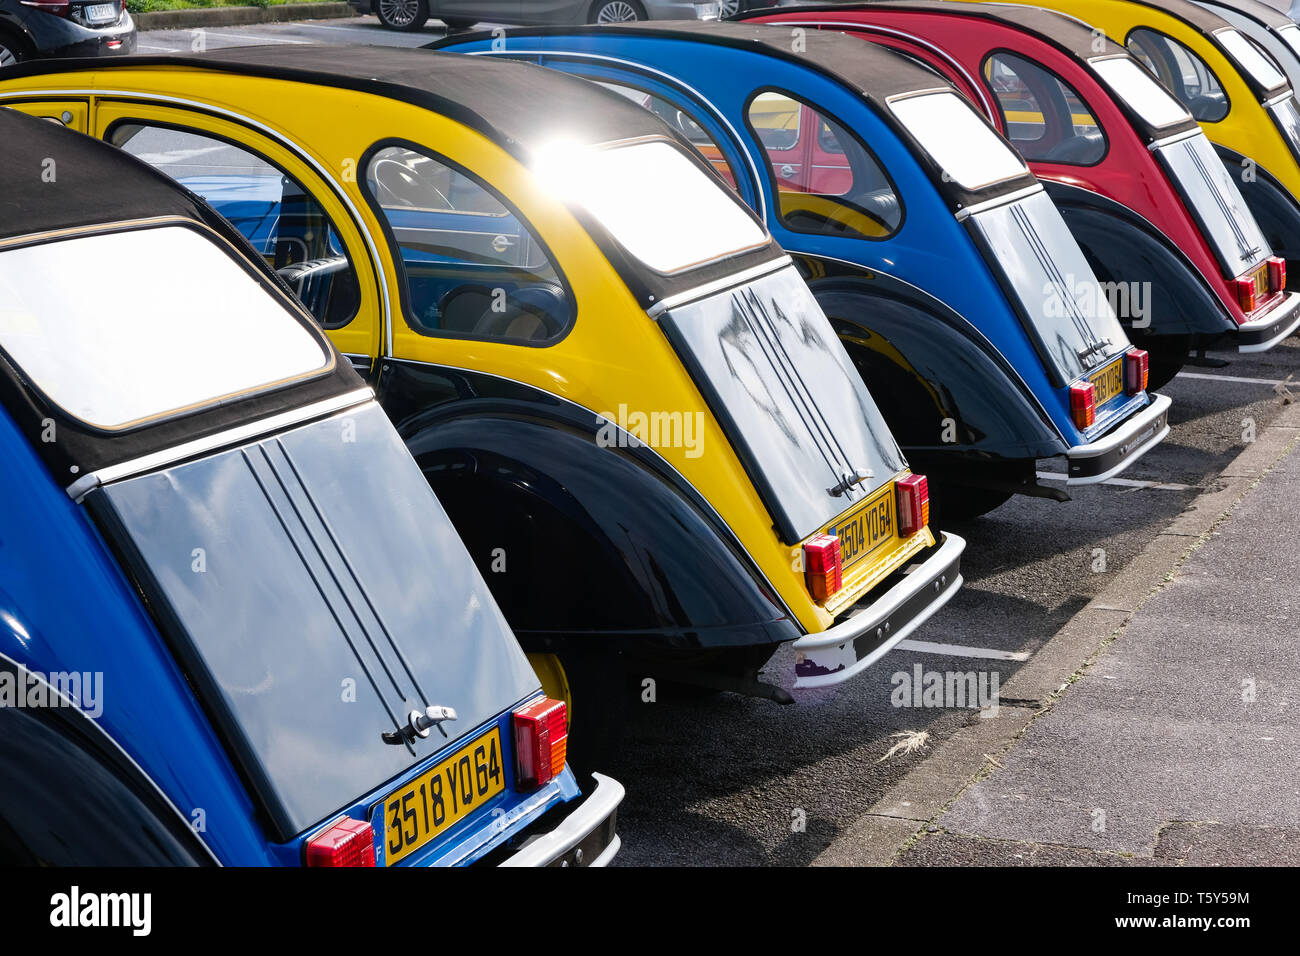 Classic Citreon 2CV motor cars for hire in Biarritz, southern France.  Credit: Gareth Llewelyn/Alamy Stock Photo